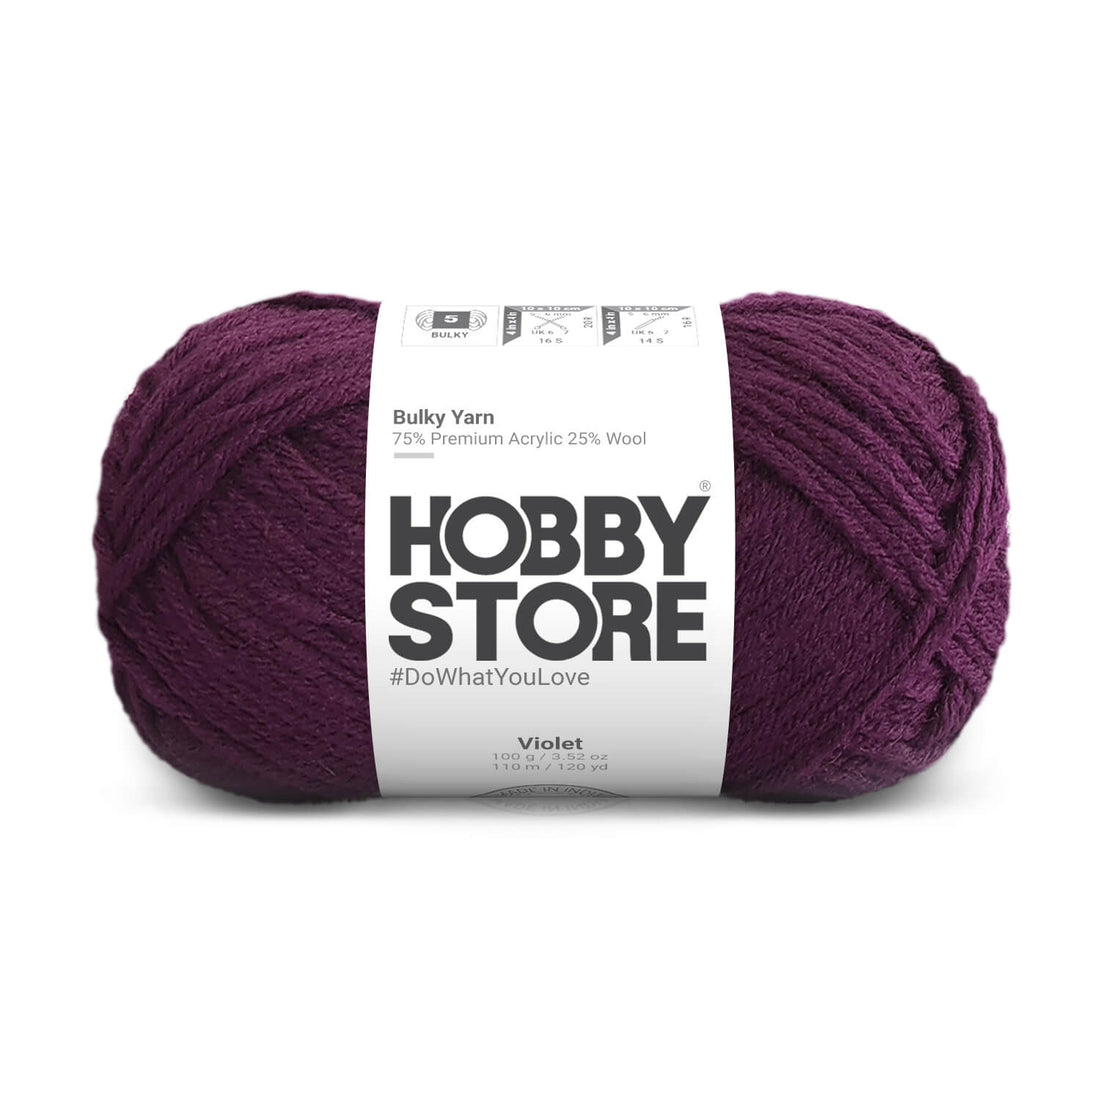 Bulky Yarn by Hobby Store - Violet 6040